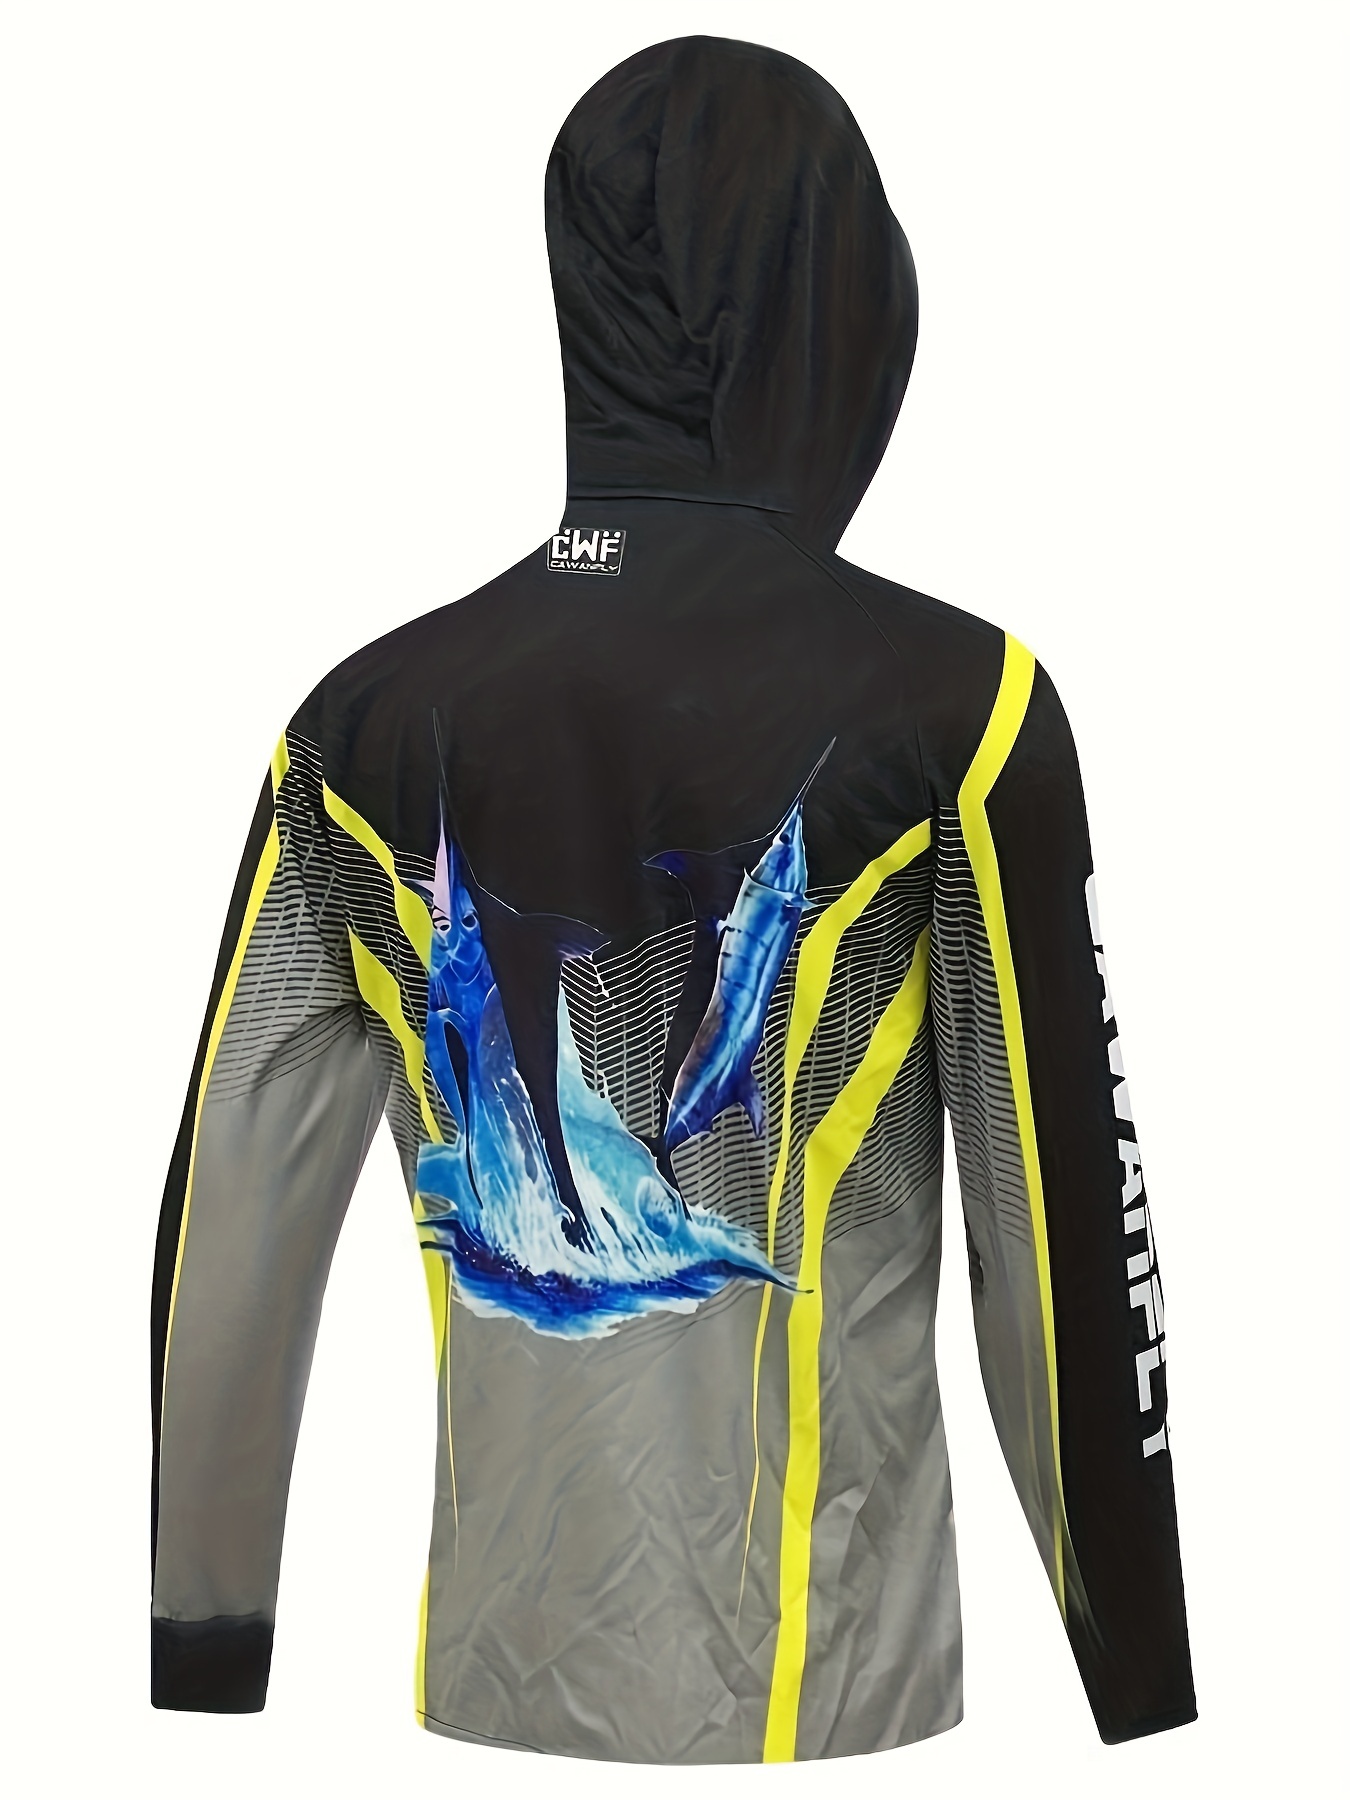 Plus Size Men's Fish & Stripes Print Hoodies Outdoor Sports Hooded